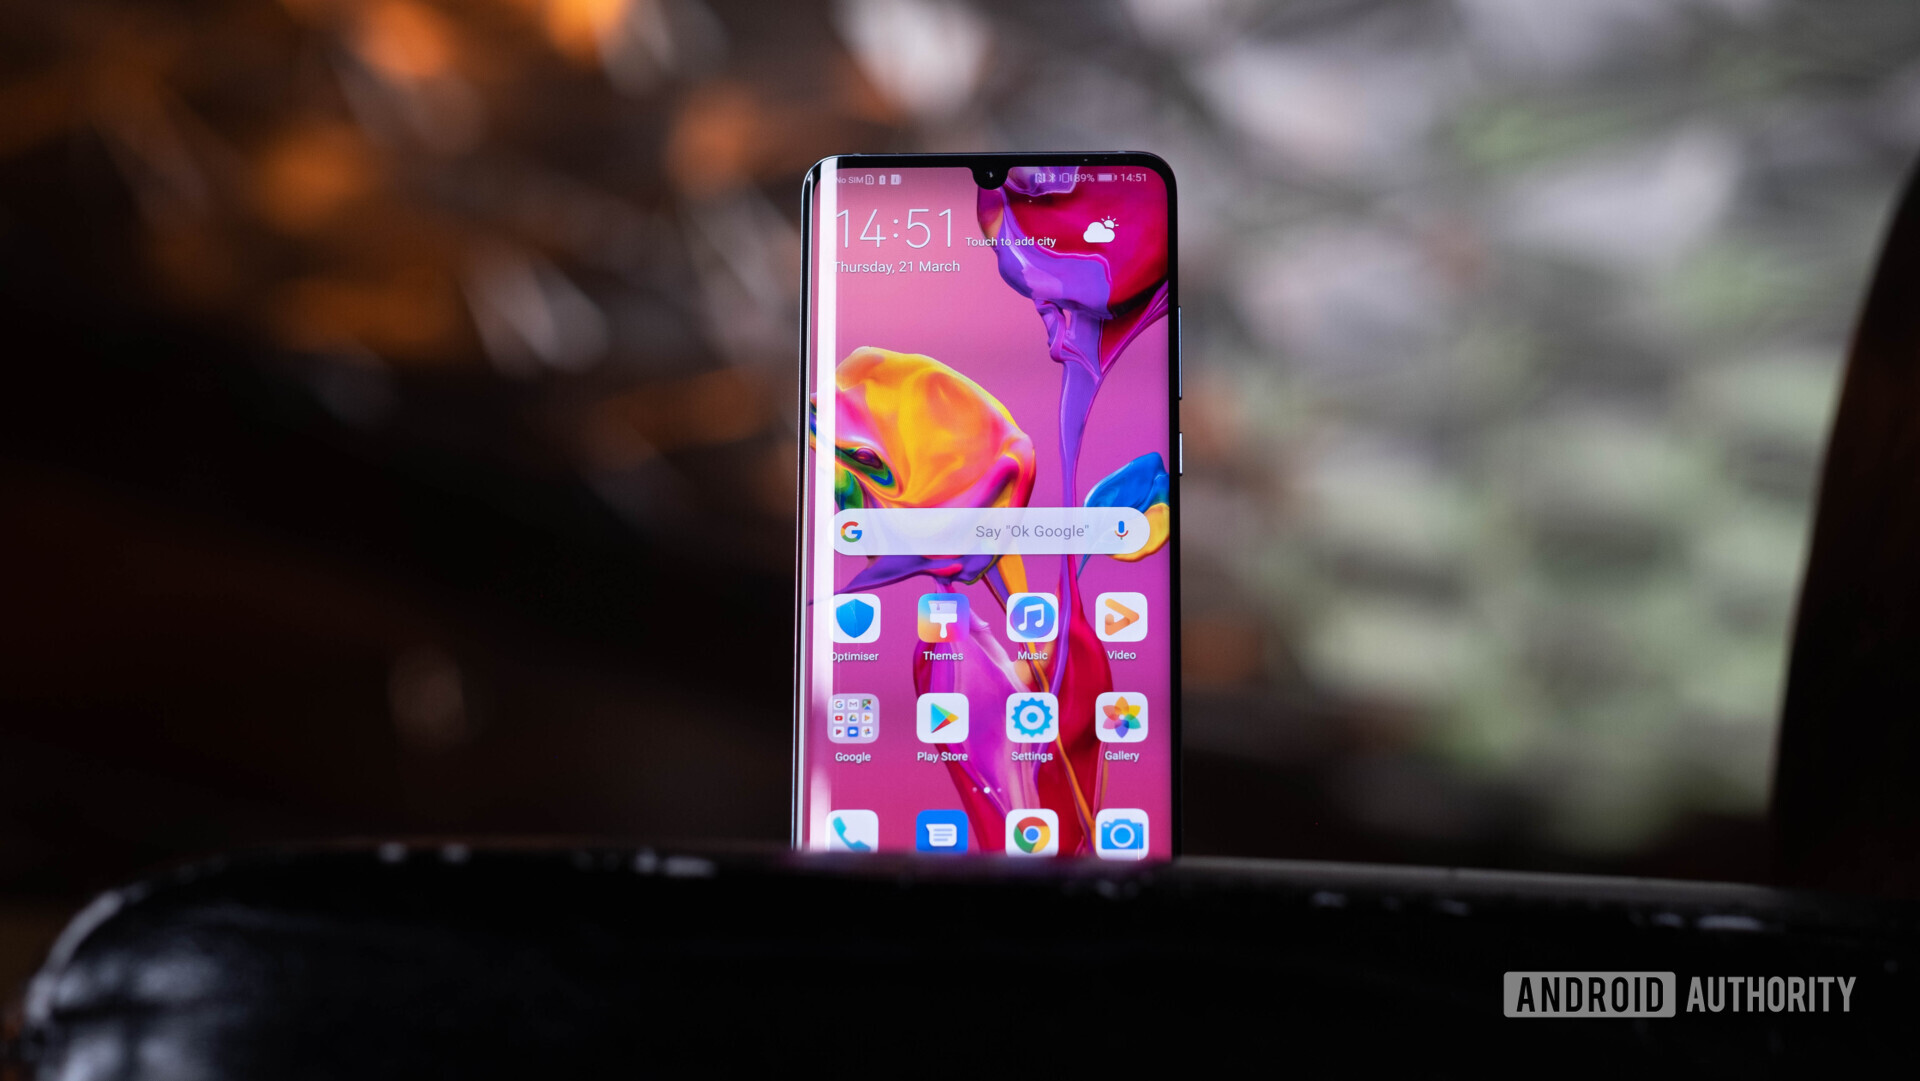 Huawei P30 Pro with an edge display